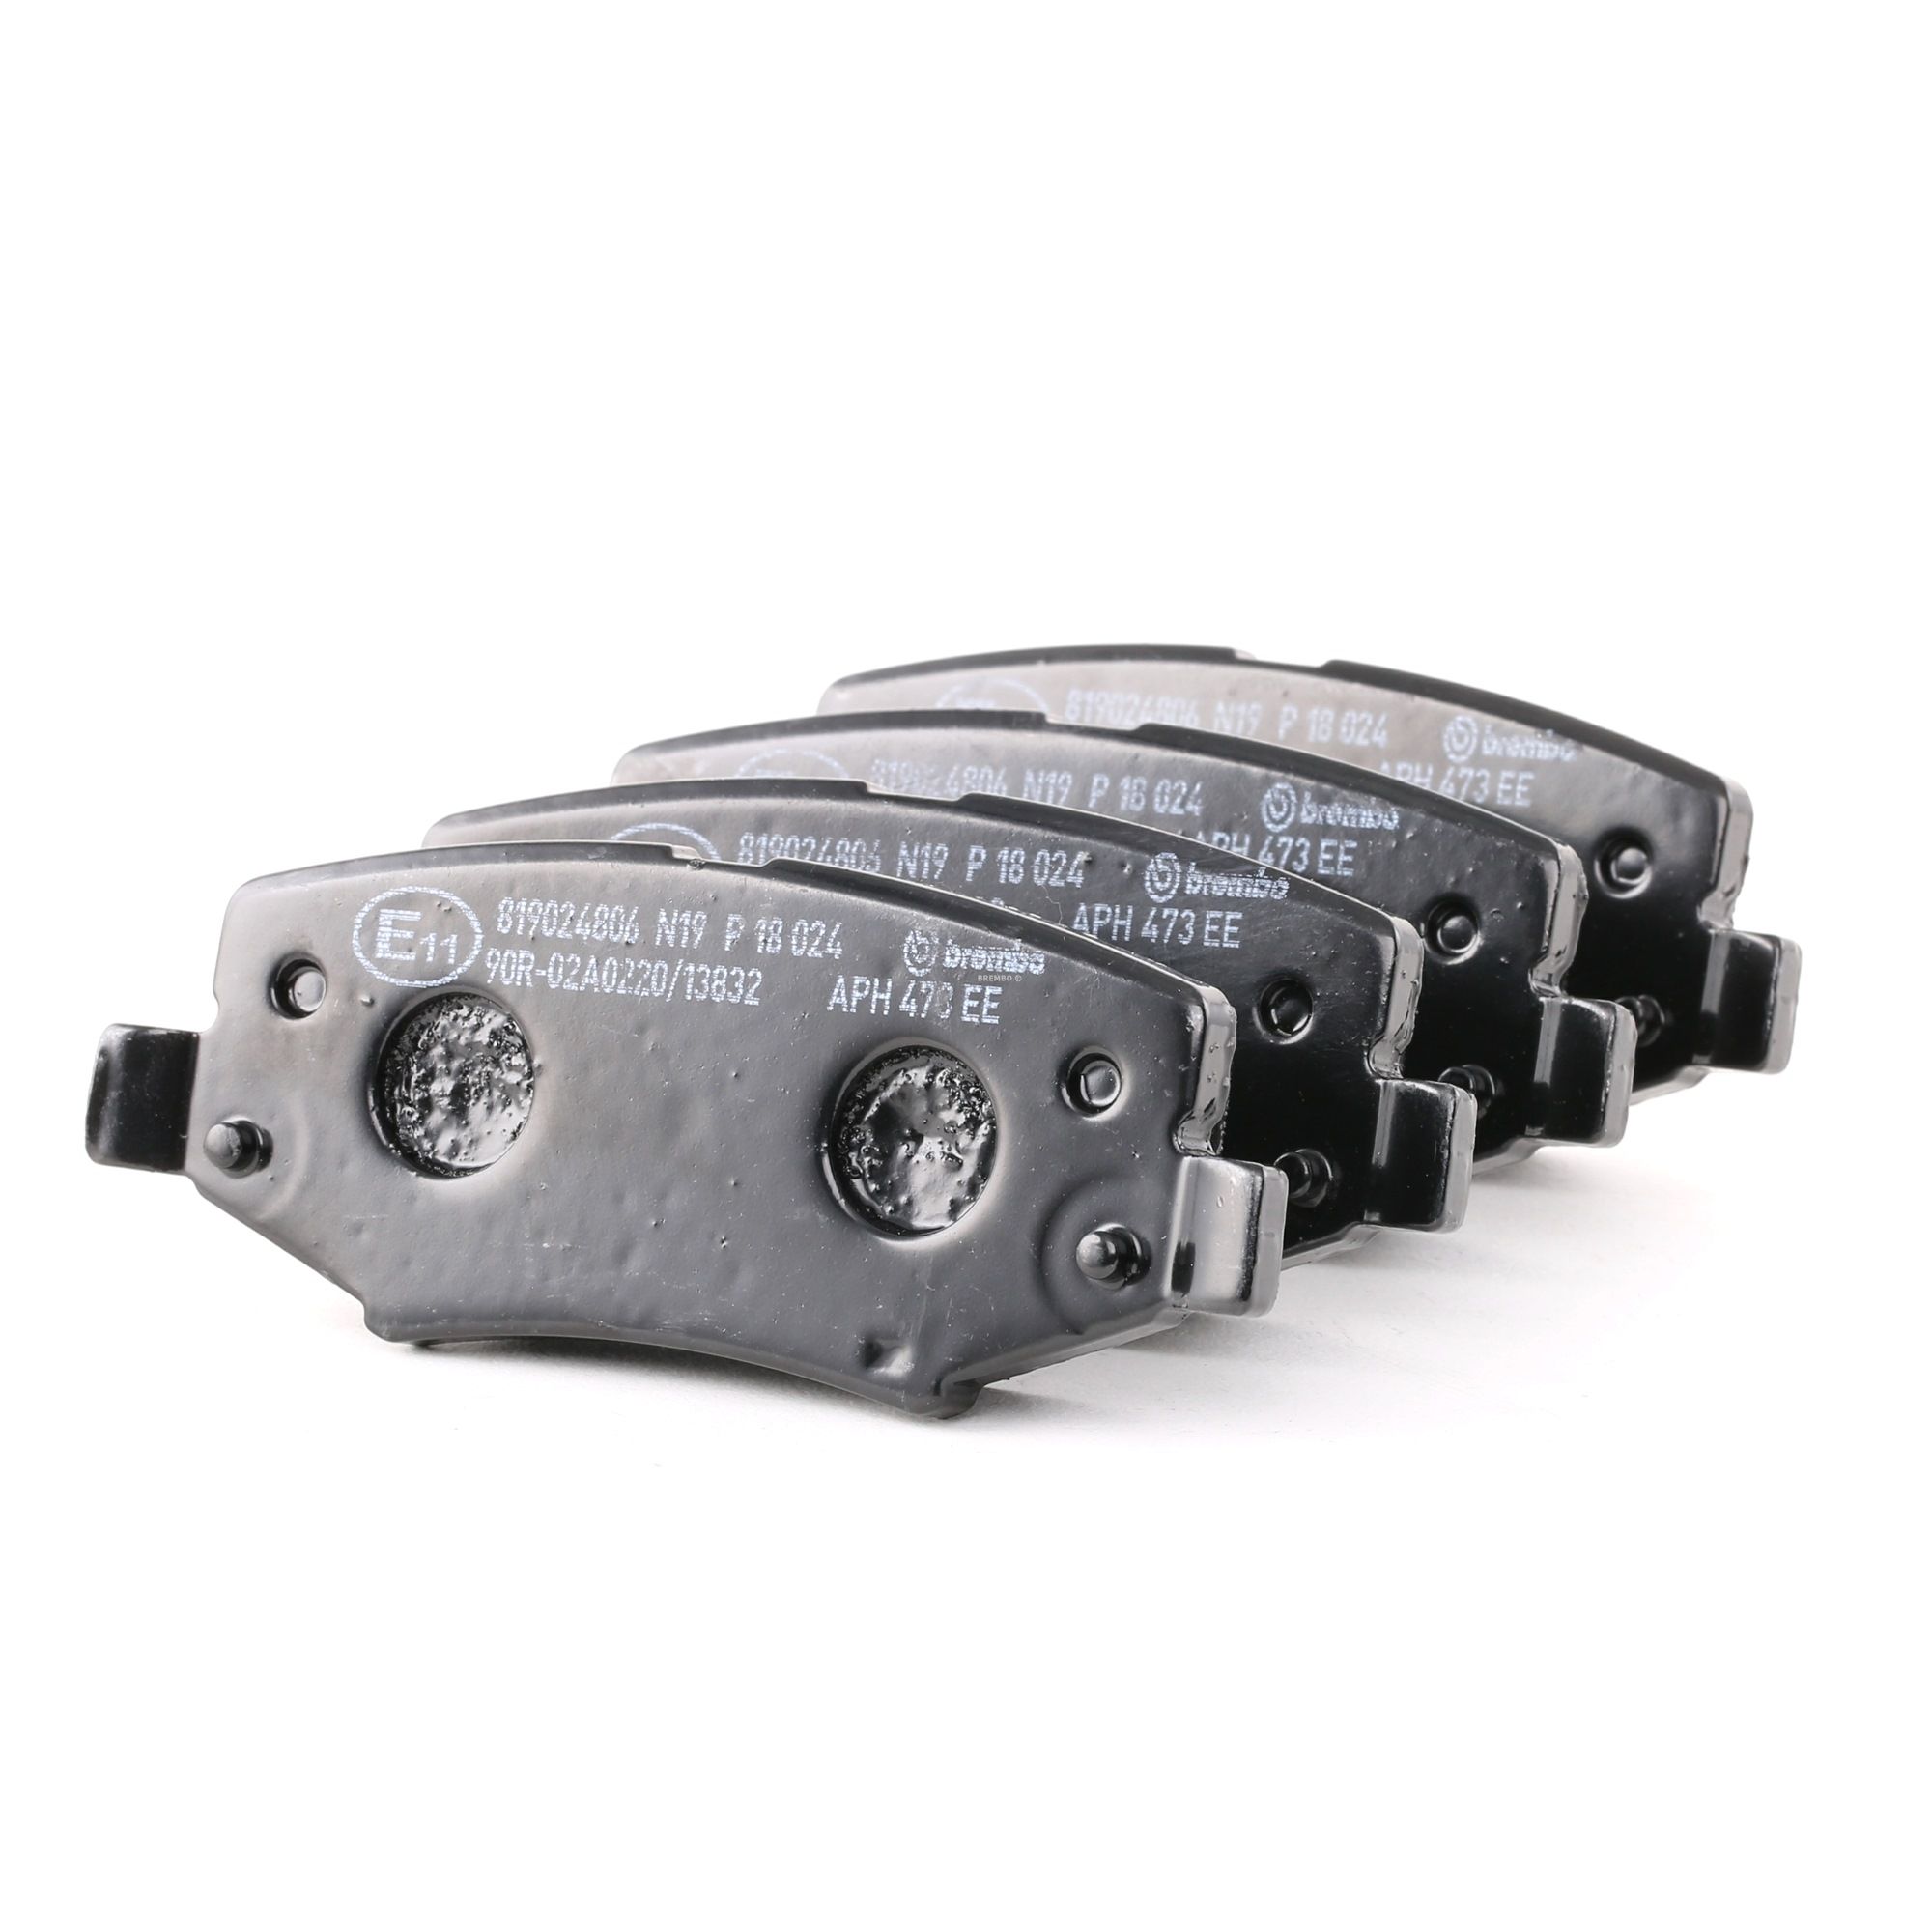 24602 BREMBO with acoustic wear warning, with accessories Height: 45mm, Width: 116mm, Thickness: 16mm Brake pads P 18 024 buy